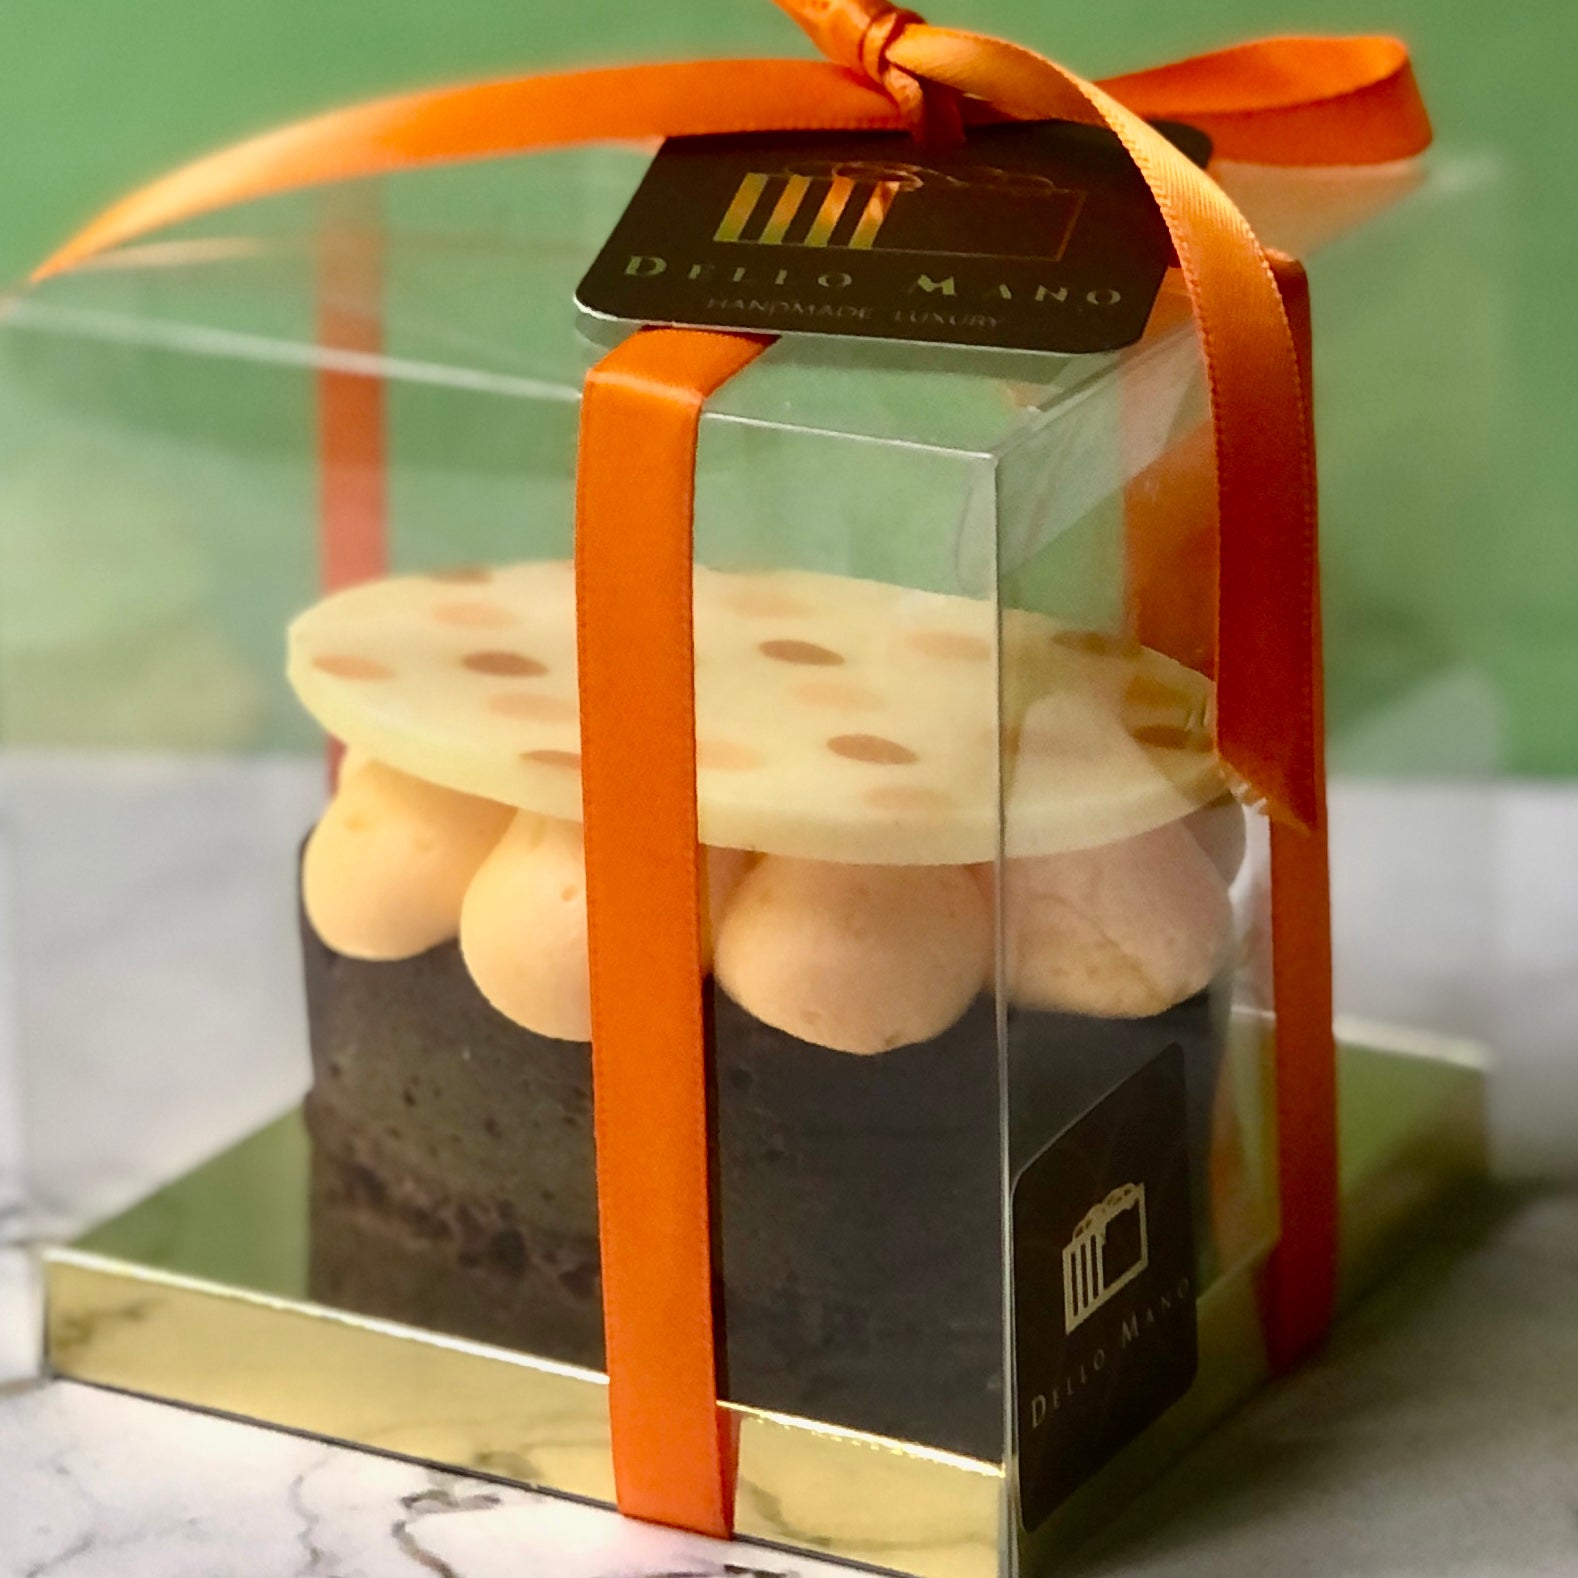 A close  up of an Easter Egg brownie beautifully packaged in a clear gift box finished with orange satin ribbon and a logo that says Dello Mano.